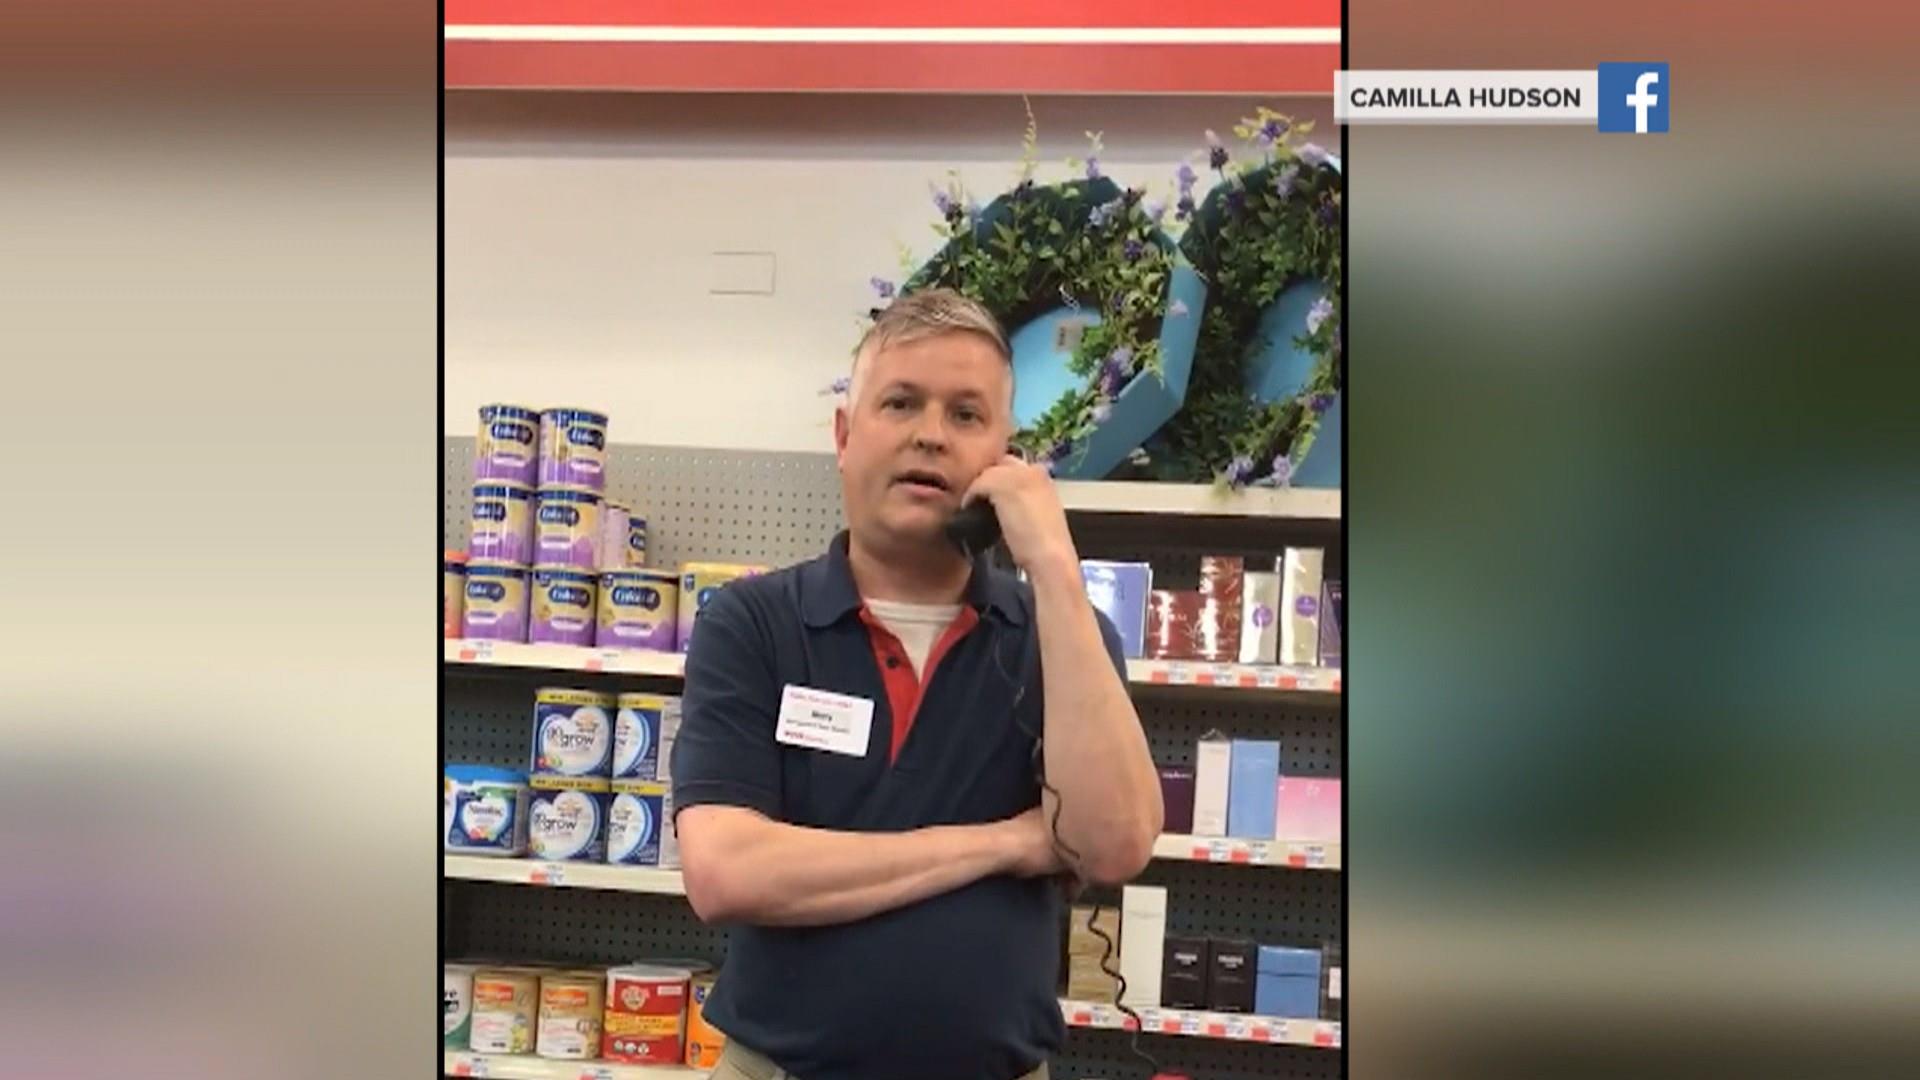 Cvs health apologizes after manager called police on black customer over coupon humana paredes